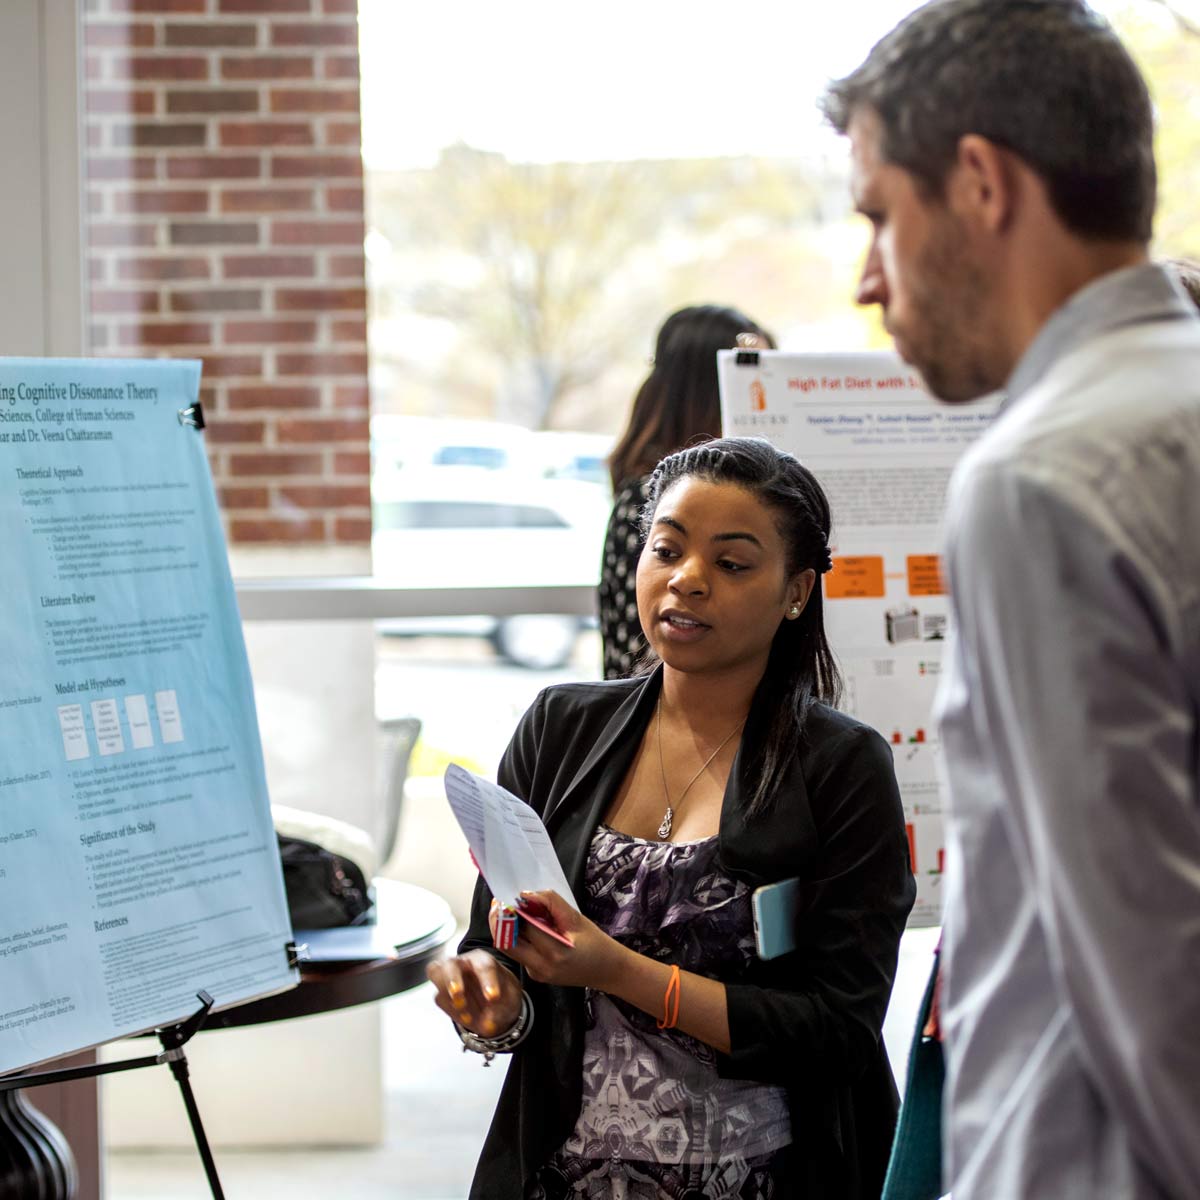 Female student discussing a poster presentation with a male professor.